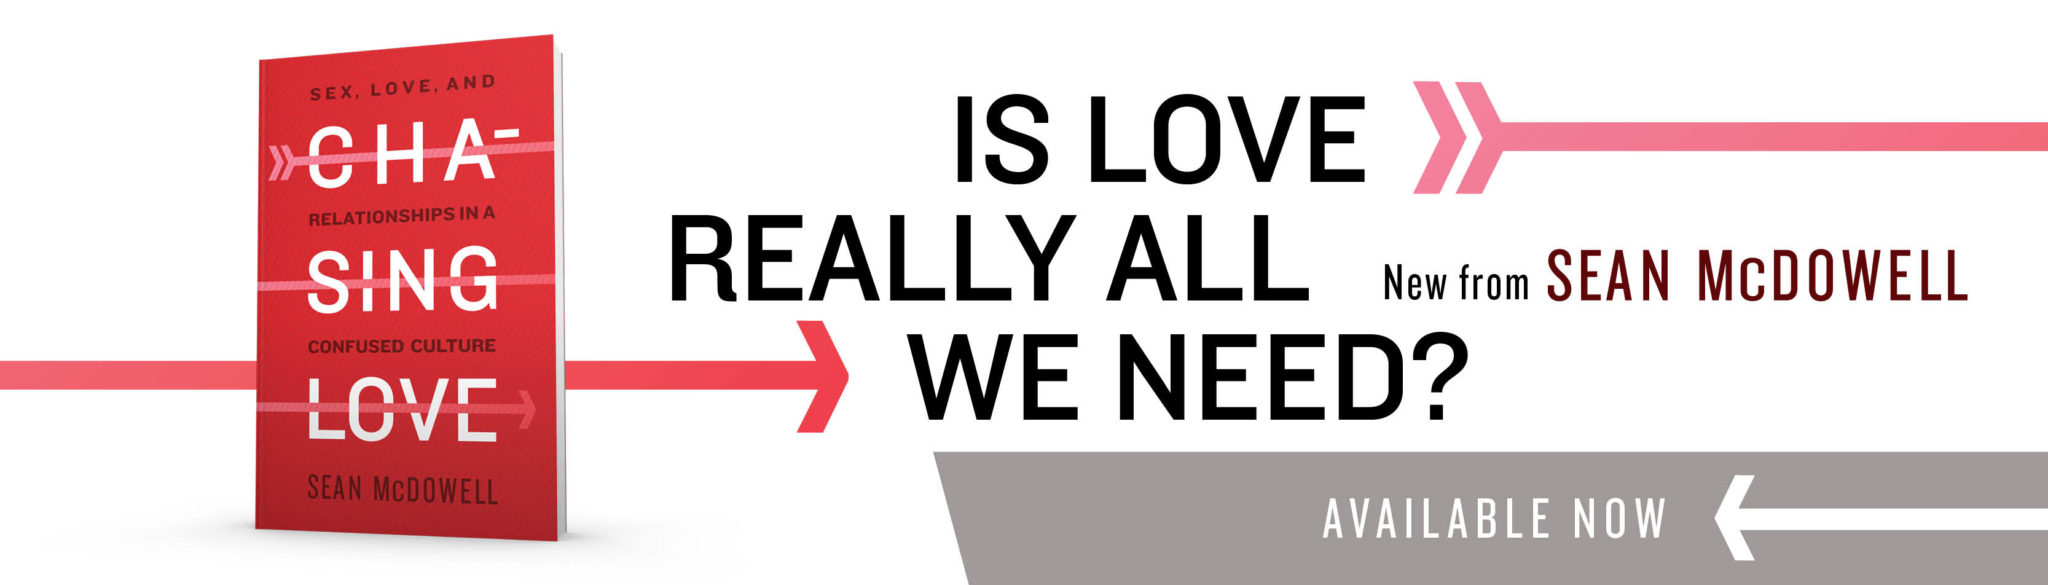 Is love really all we need? New from Sean McDowell